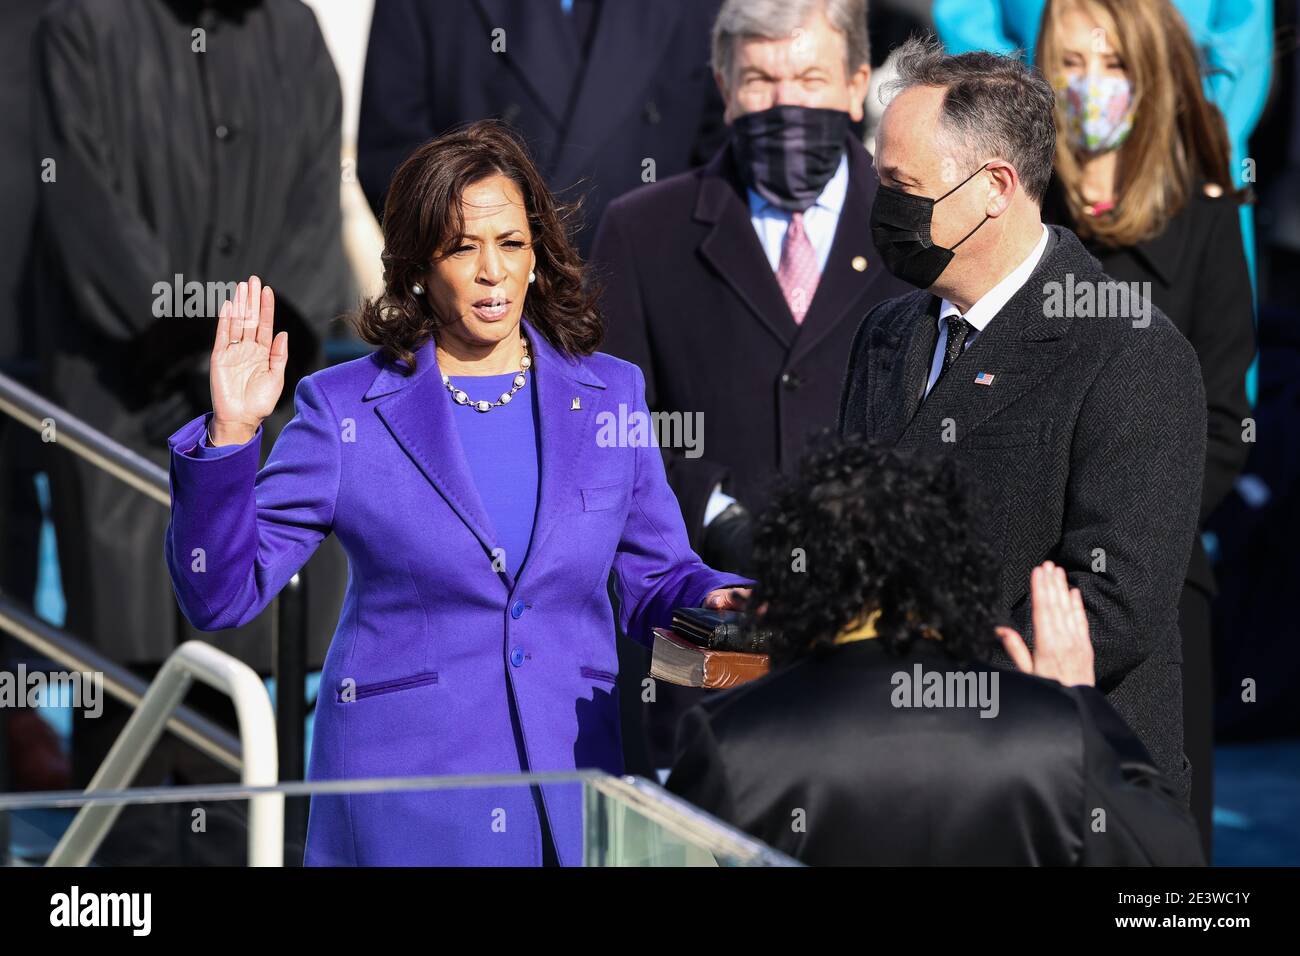 Washington, USA. 20th Jan, 2021. Vice President-elect Kamala Harris takes the Oath of Office to become the Vice President of the United States as she is sworn-in by Supreme Court Justice Sonia Sotomayor during the Inauguration Day ceremony of Joe Biden held at the U.S. Capitol Building in Washington, DC on Jan. 20, 2021. (Photo by Oliver Contreras/Sipa USA) Credit: Sipa USA/Alamy Live News Stock Photo